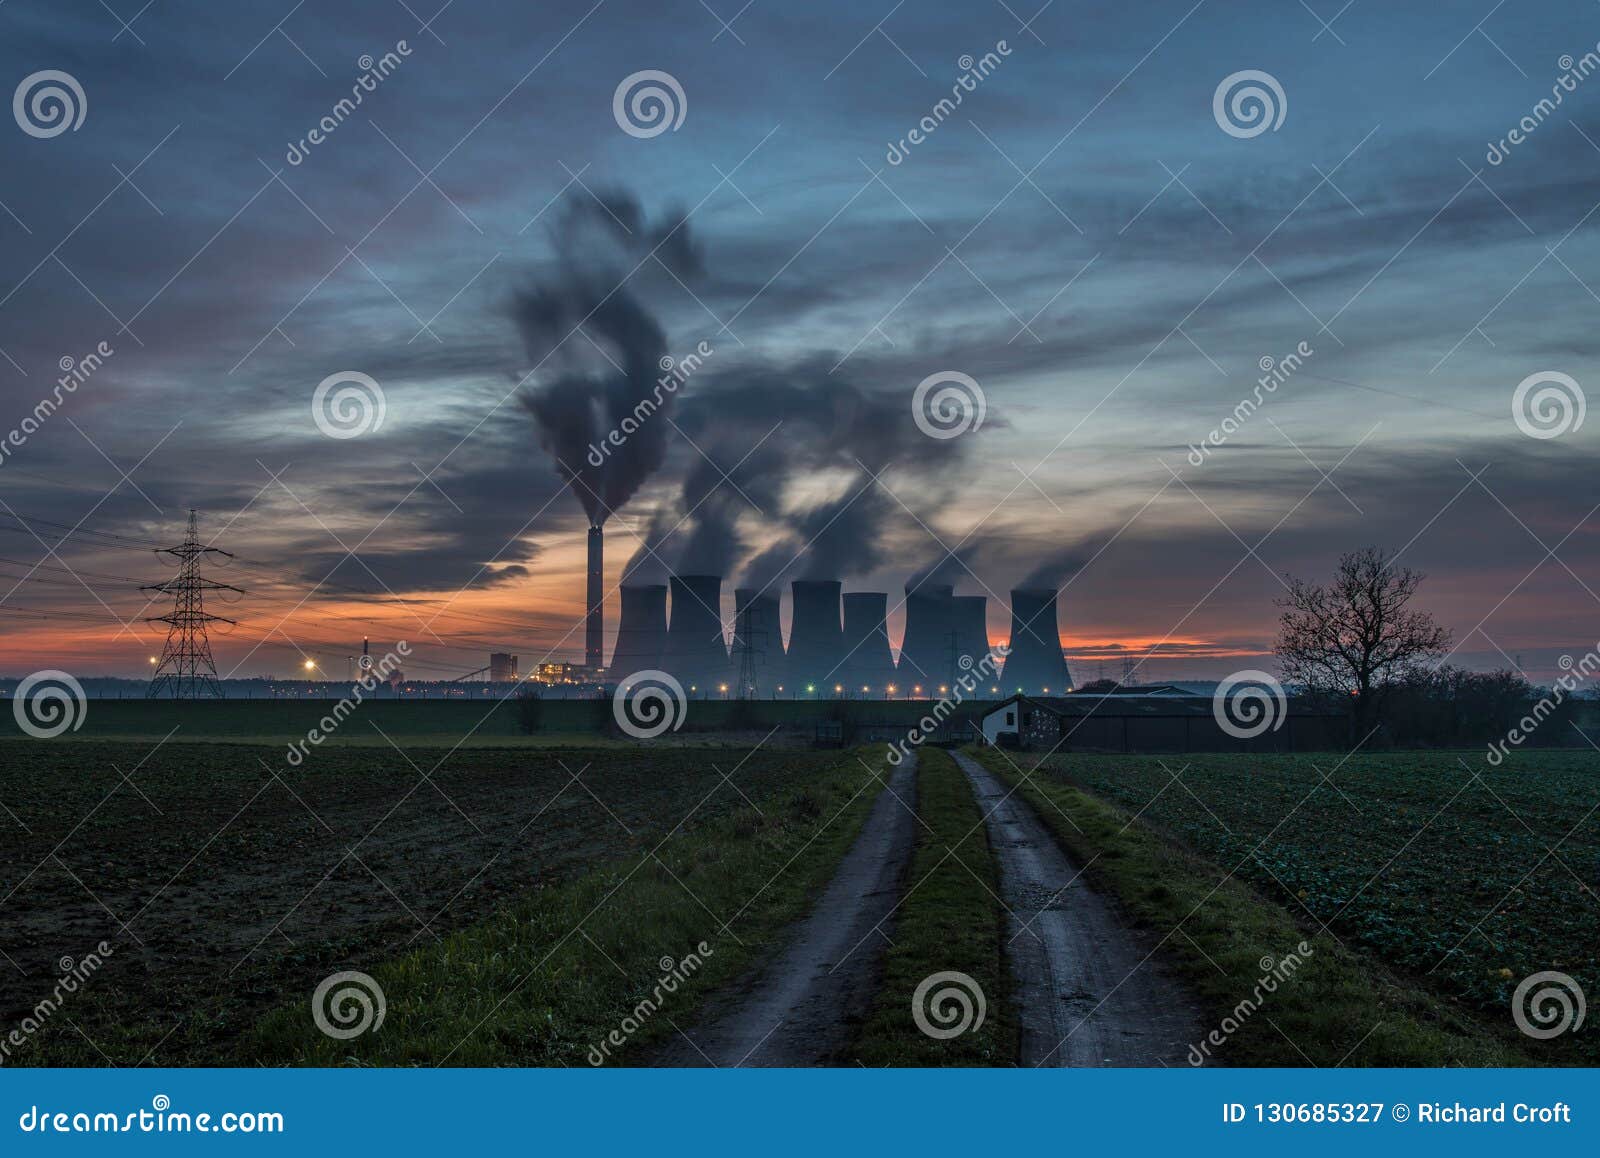 the steam rises from the cooling towers at sunset